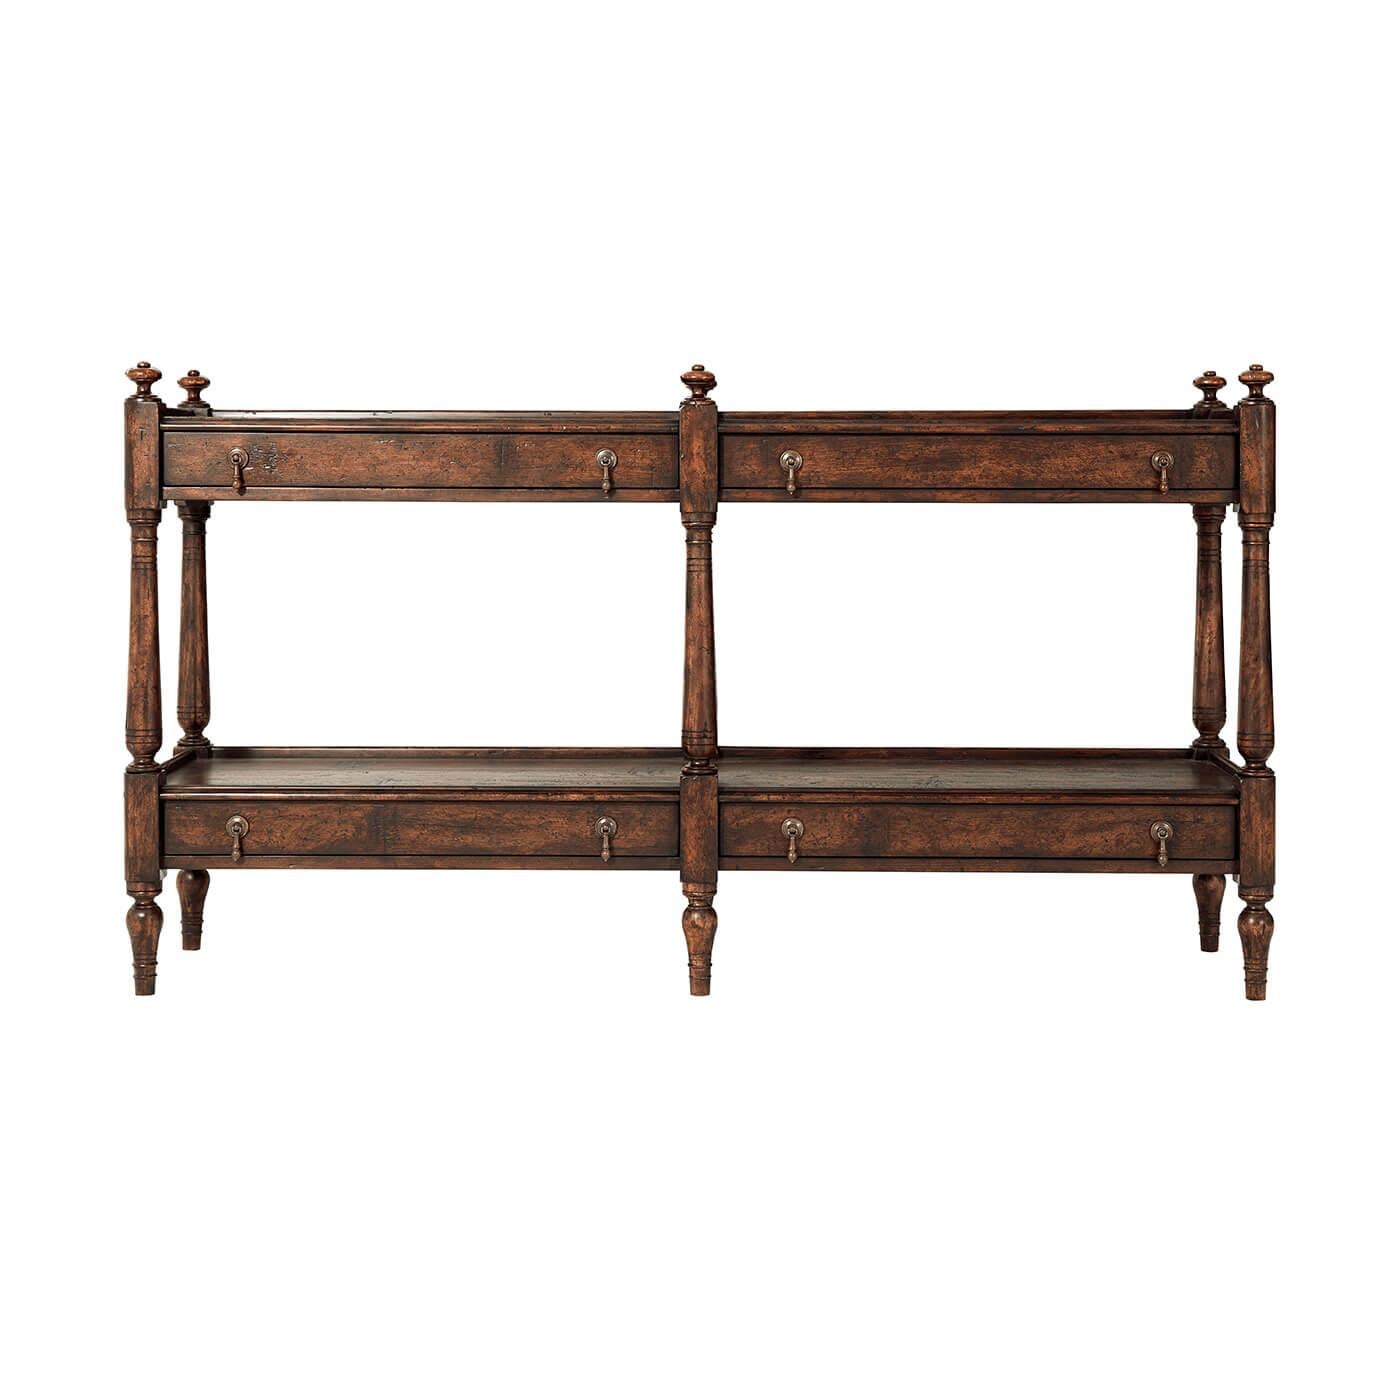 An English Regency style mahogany and reclaimed oak veneered console table restored with pollard oak, the rectangular three quarter gallery top with six turned finials atop each turned leg, with two frieze drawers and a similar under tier below, on